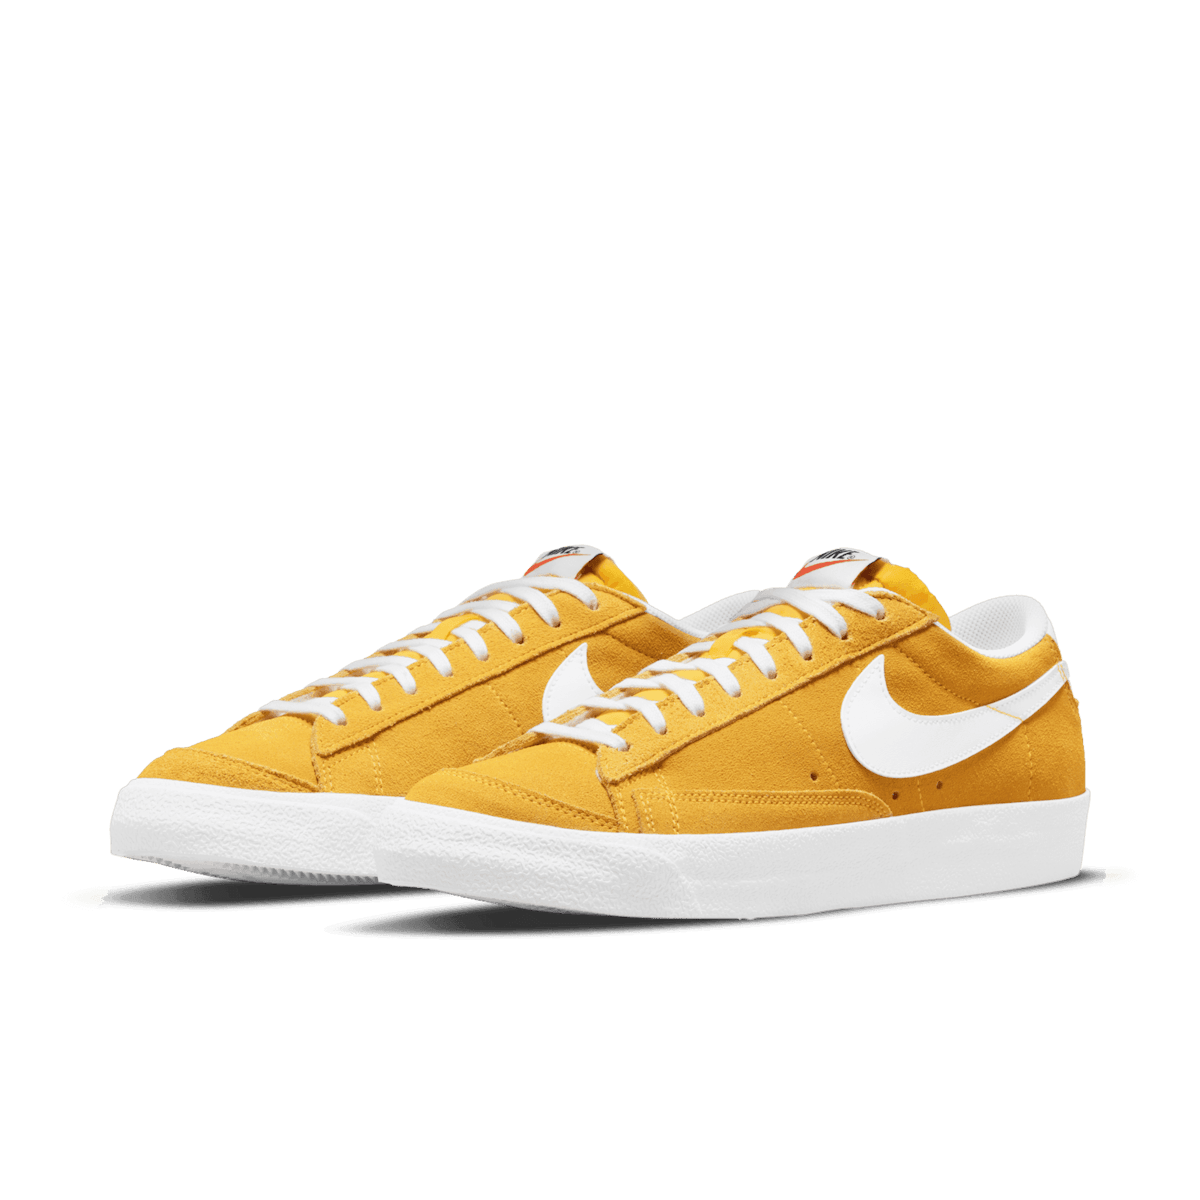 Nike Blazer Low '77 Shoes in Yellow Angle 2